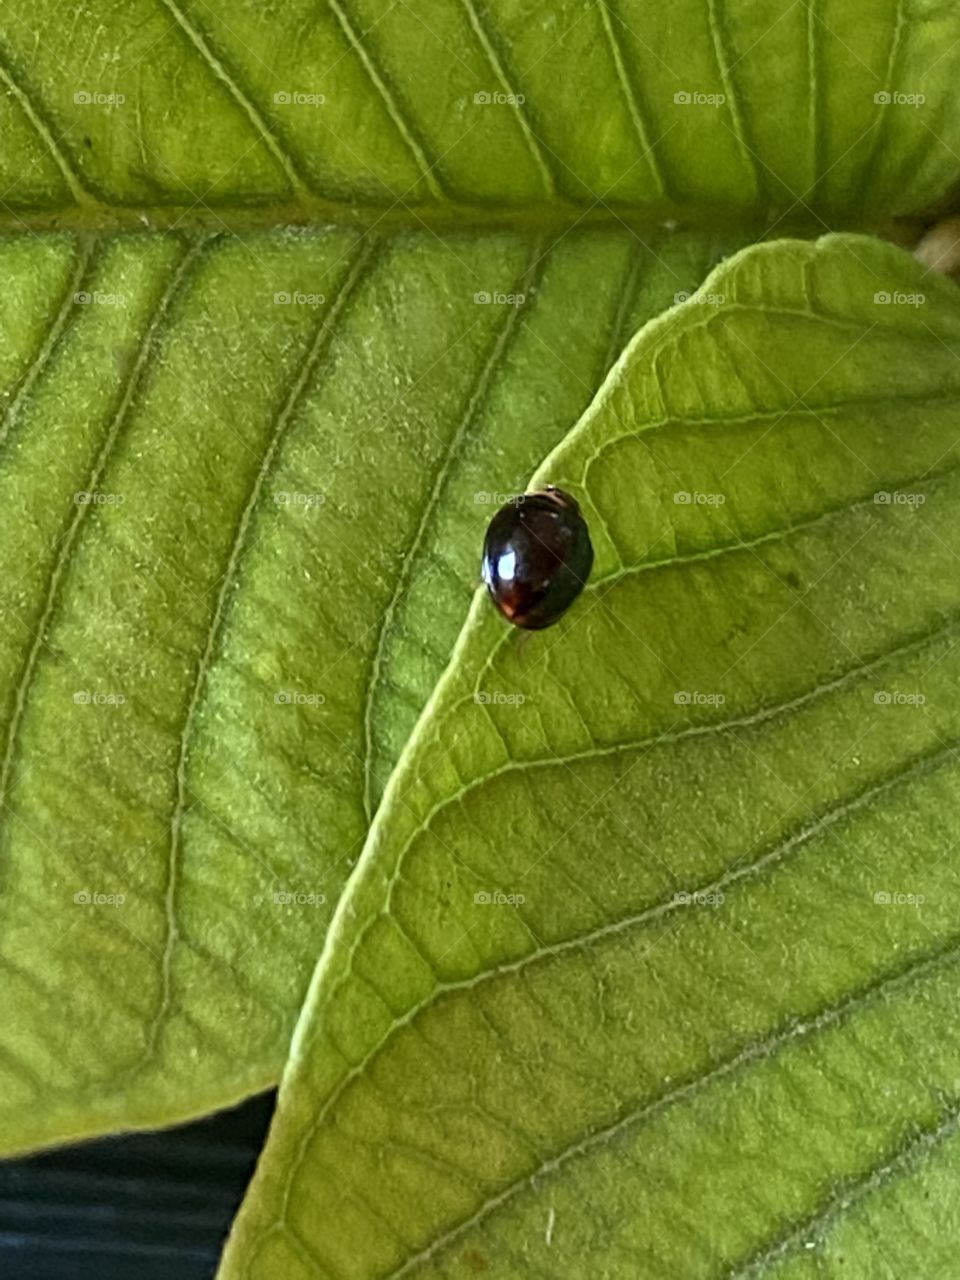 A little insect is walking on a plant leave